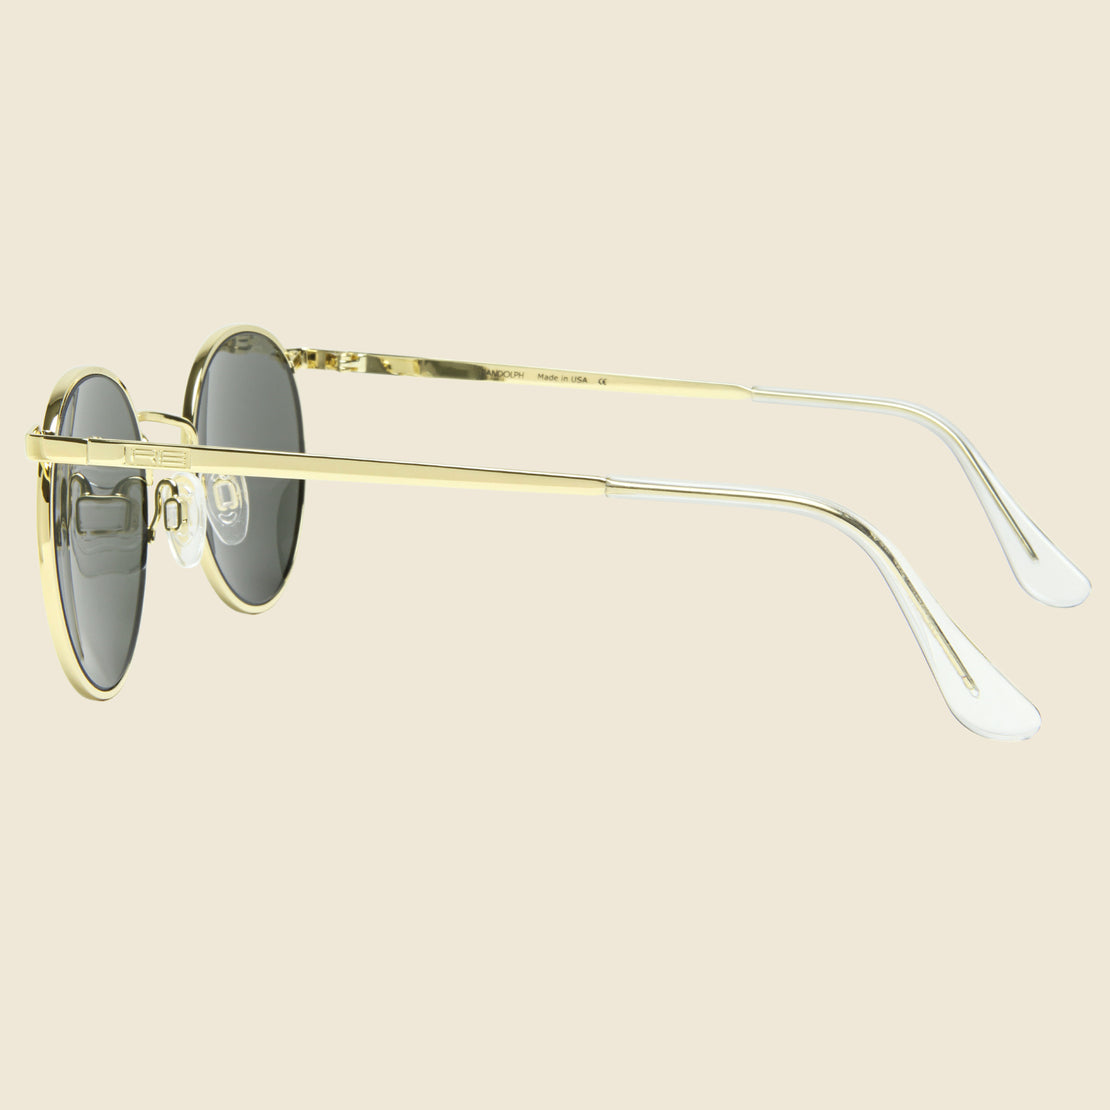 P3 Sunglasses - Polarized American Gray/Gold - Randolph Engineering - STAG Provisions - Accessories - Eyewear